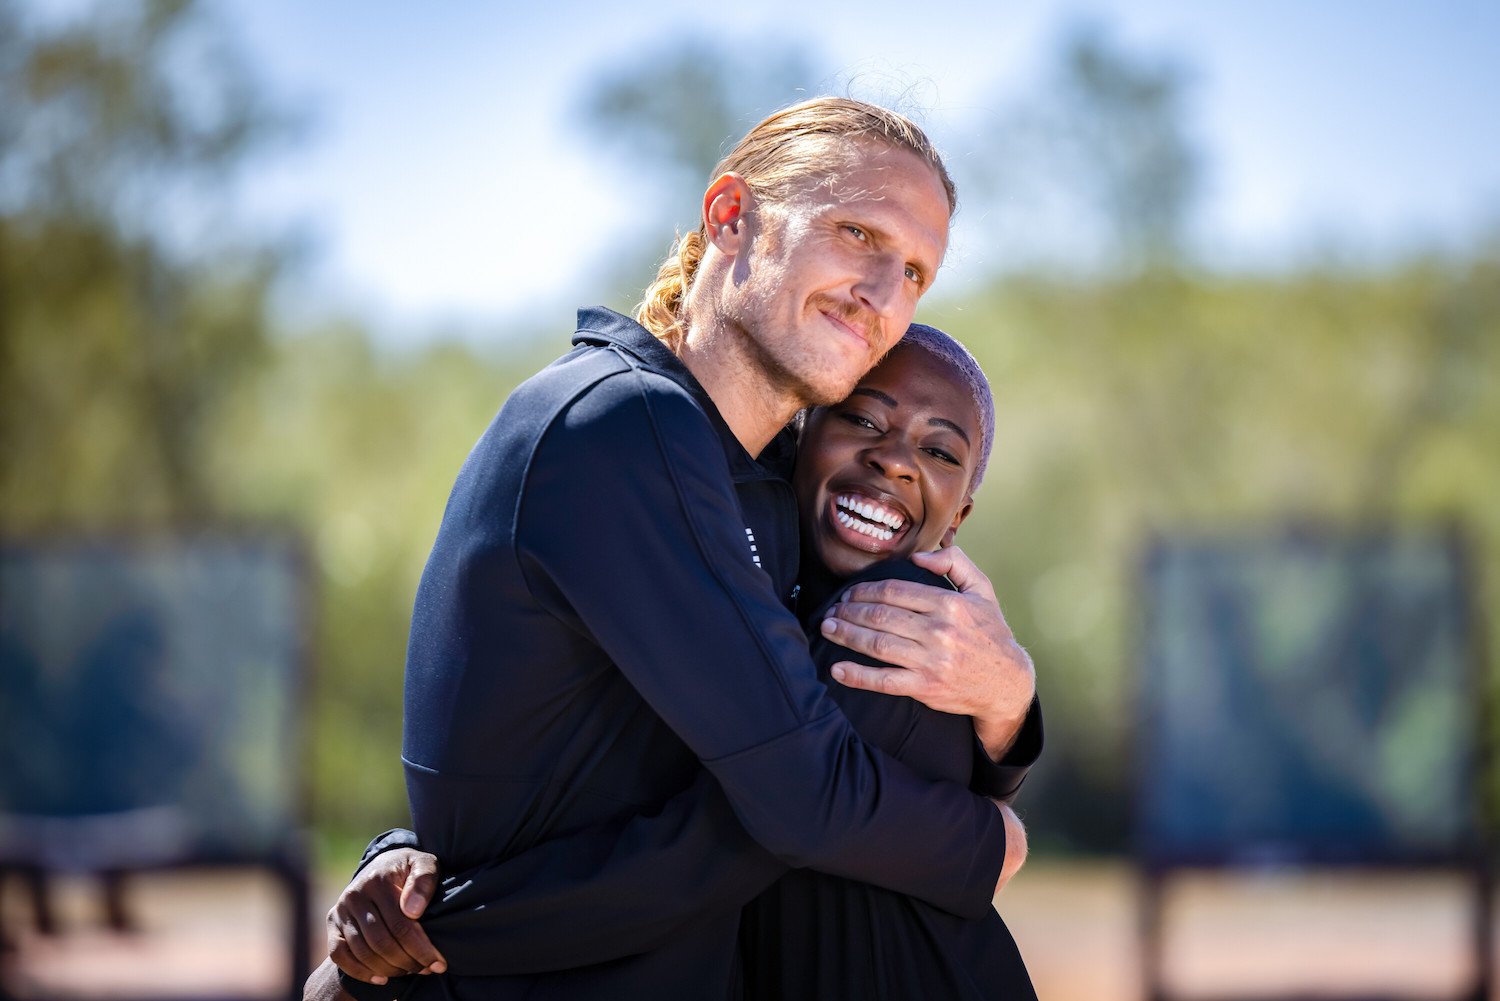 Tyson Apostol and Cashay Proudfoot hugging in 'The Challenge: USA'